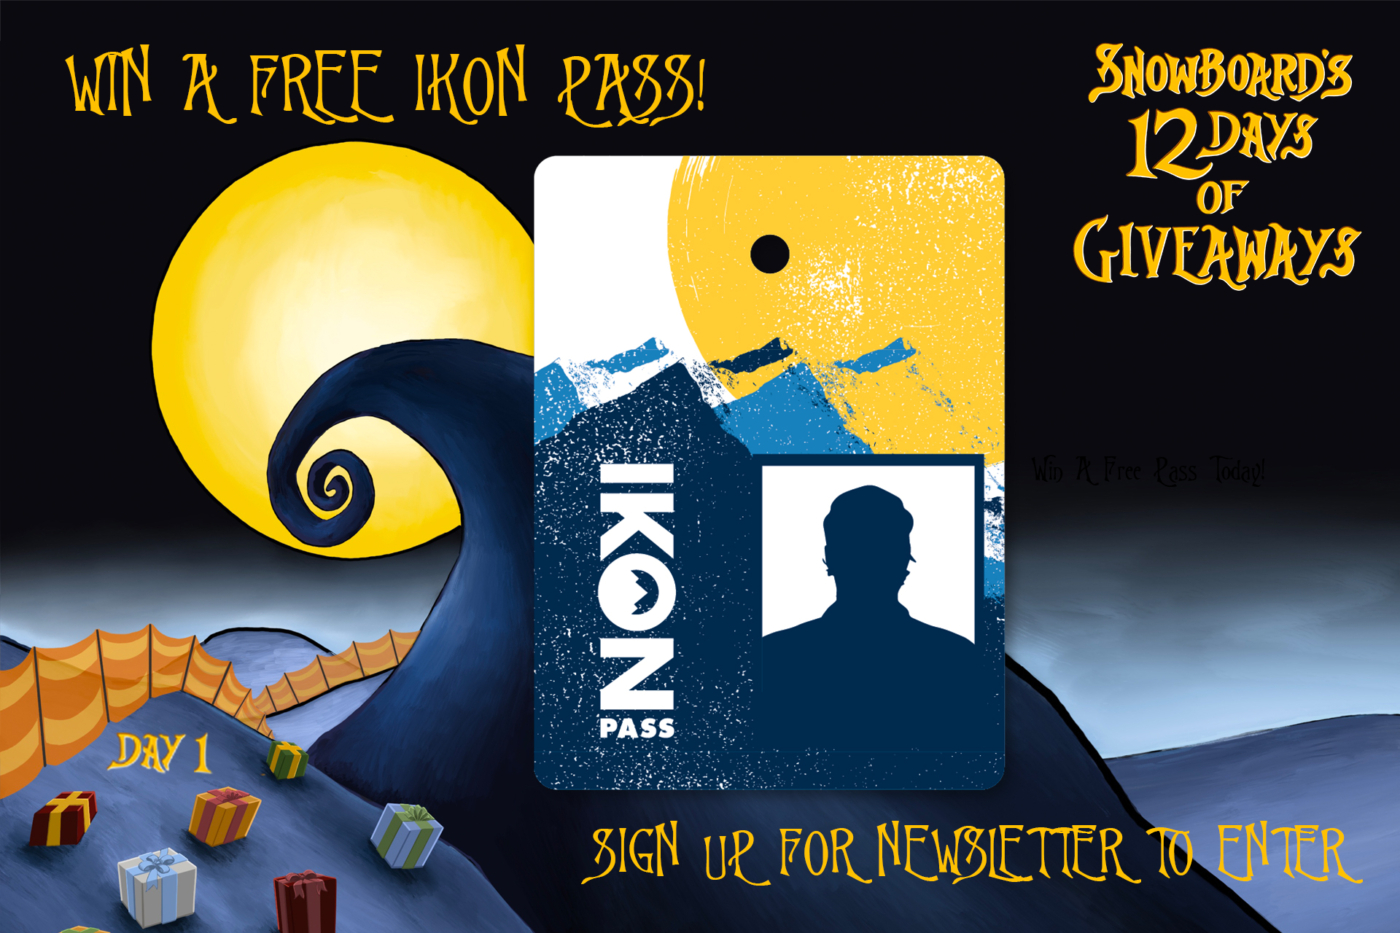 The 12 days of giveaways are here! Snowboard Magazine